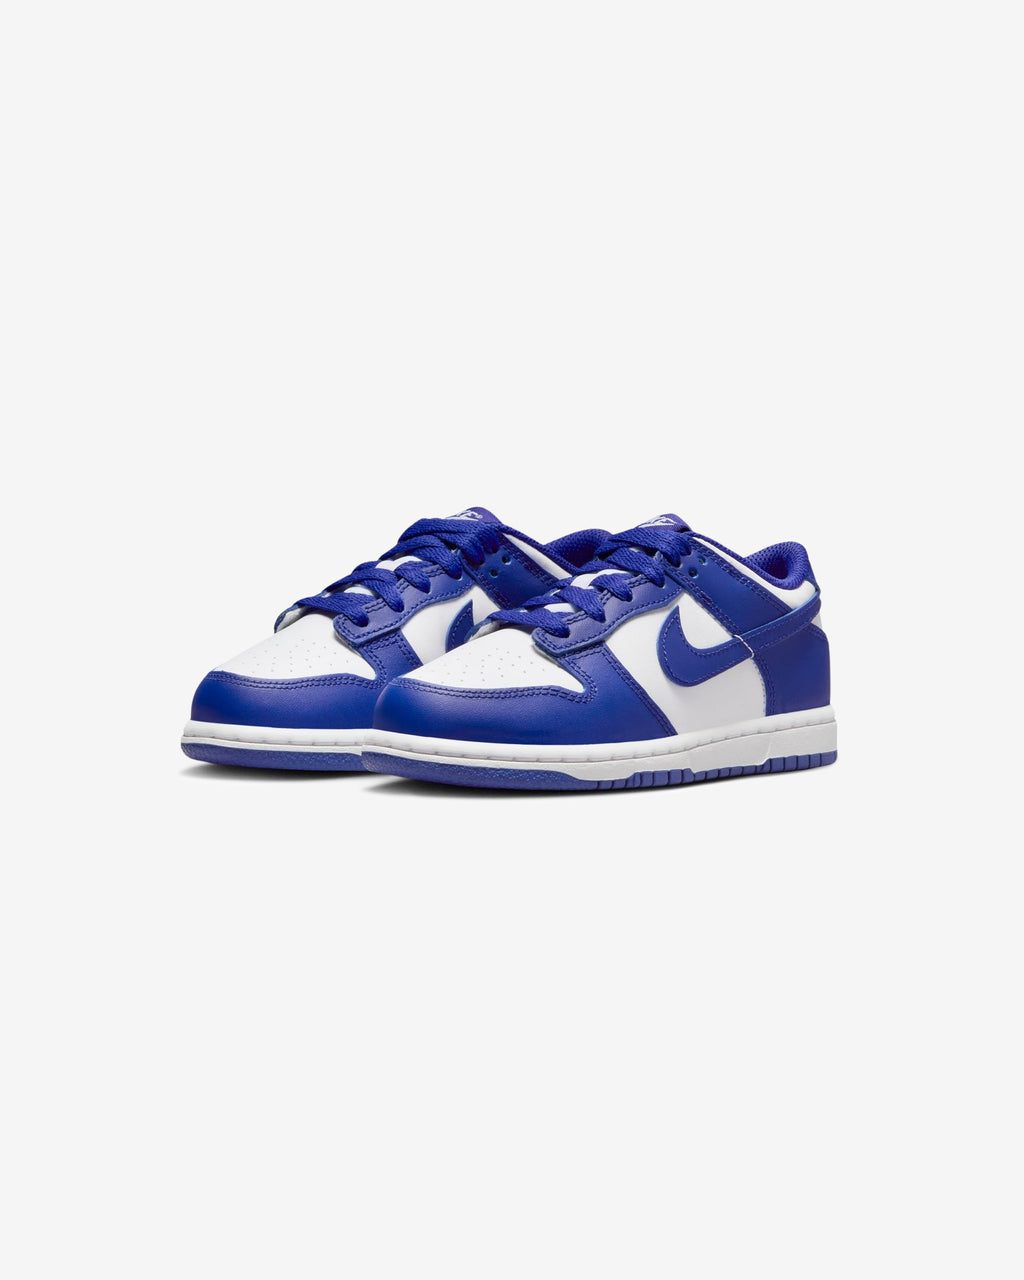 NIKE PS DUNK LOW - WHITE/ CONCORD/ UNIVERSITYRED